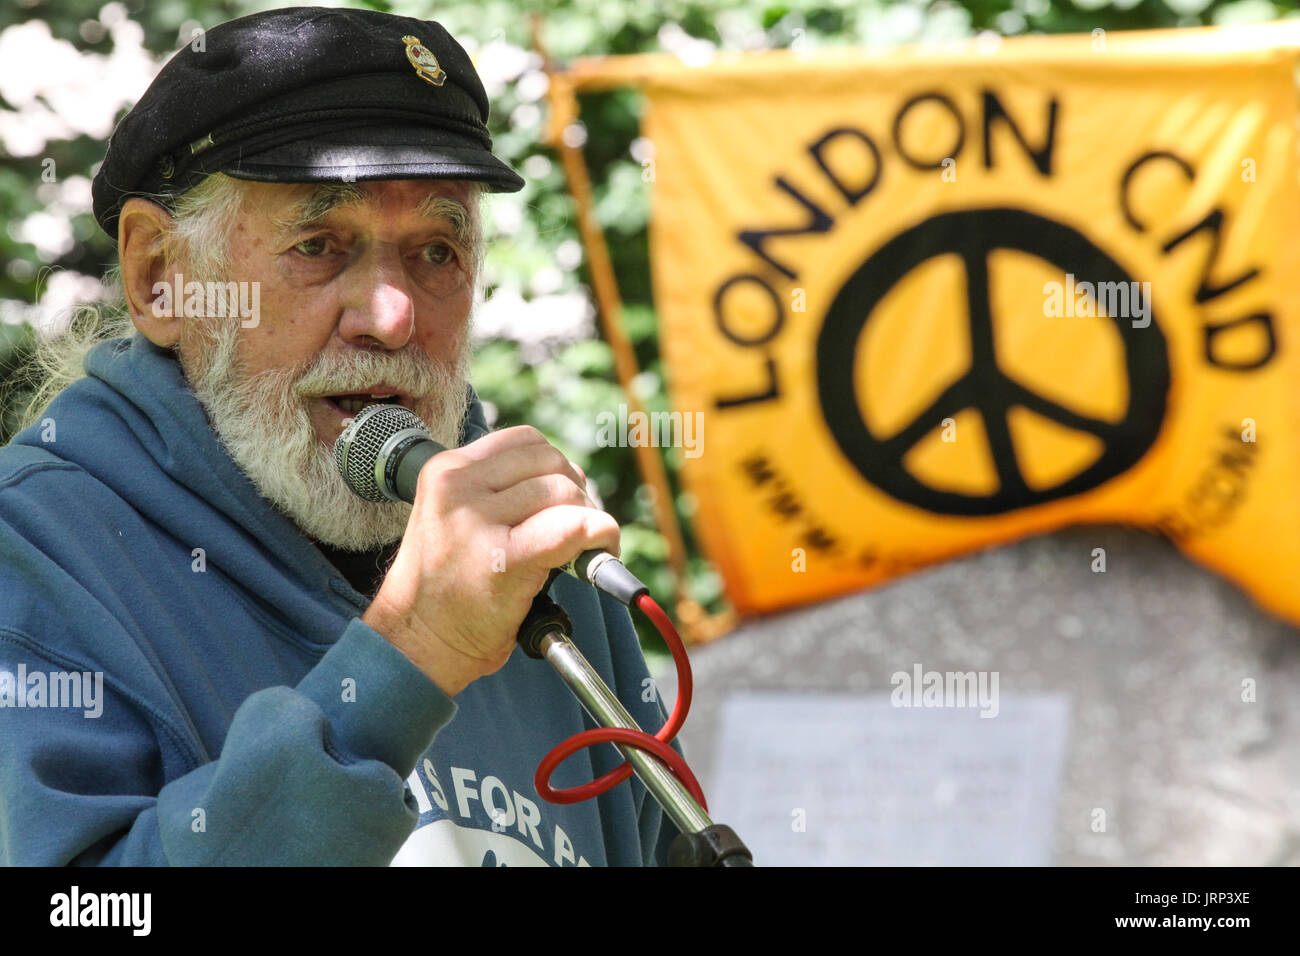 London, UK. 6th August, 2017. Jim Radford, D-Day veteran, folk singer and peace campaigner with Veterans for Peace, addresses peace campaigners attending the annual Hiroshima Day anniversary event in Tavistock Square, next to the commemorative Hiroshima cherry tree. Credit: Mark Kerrison/Alamy Live News Stock Photo